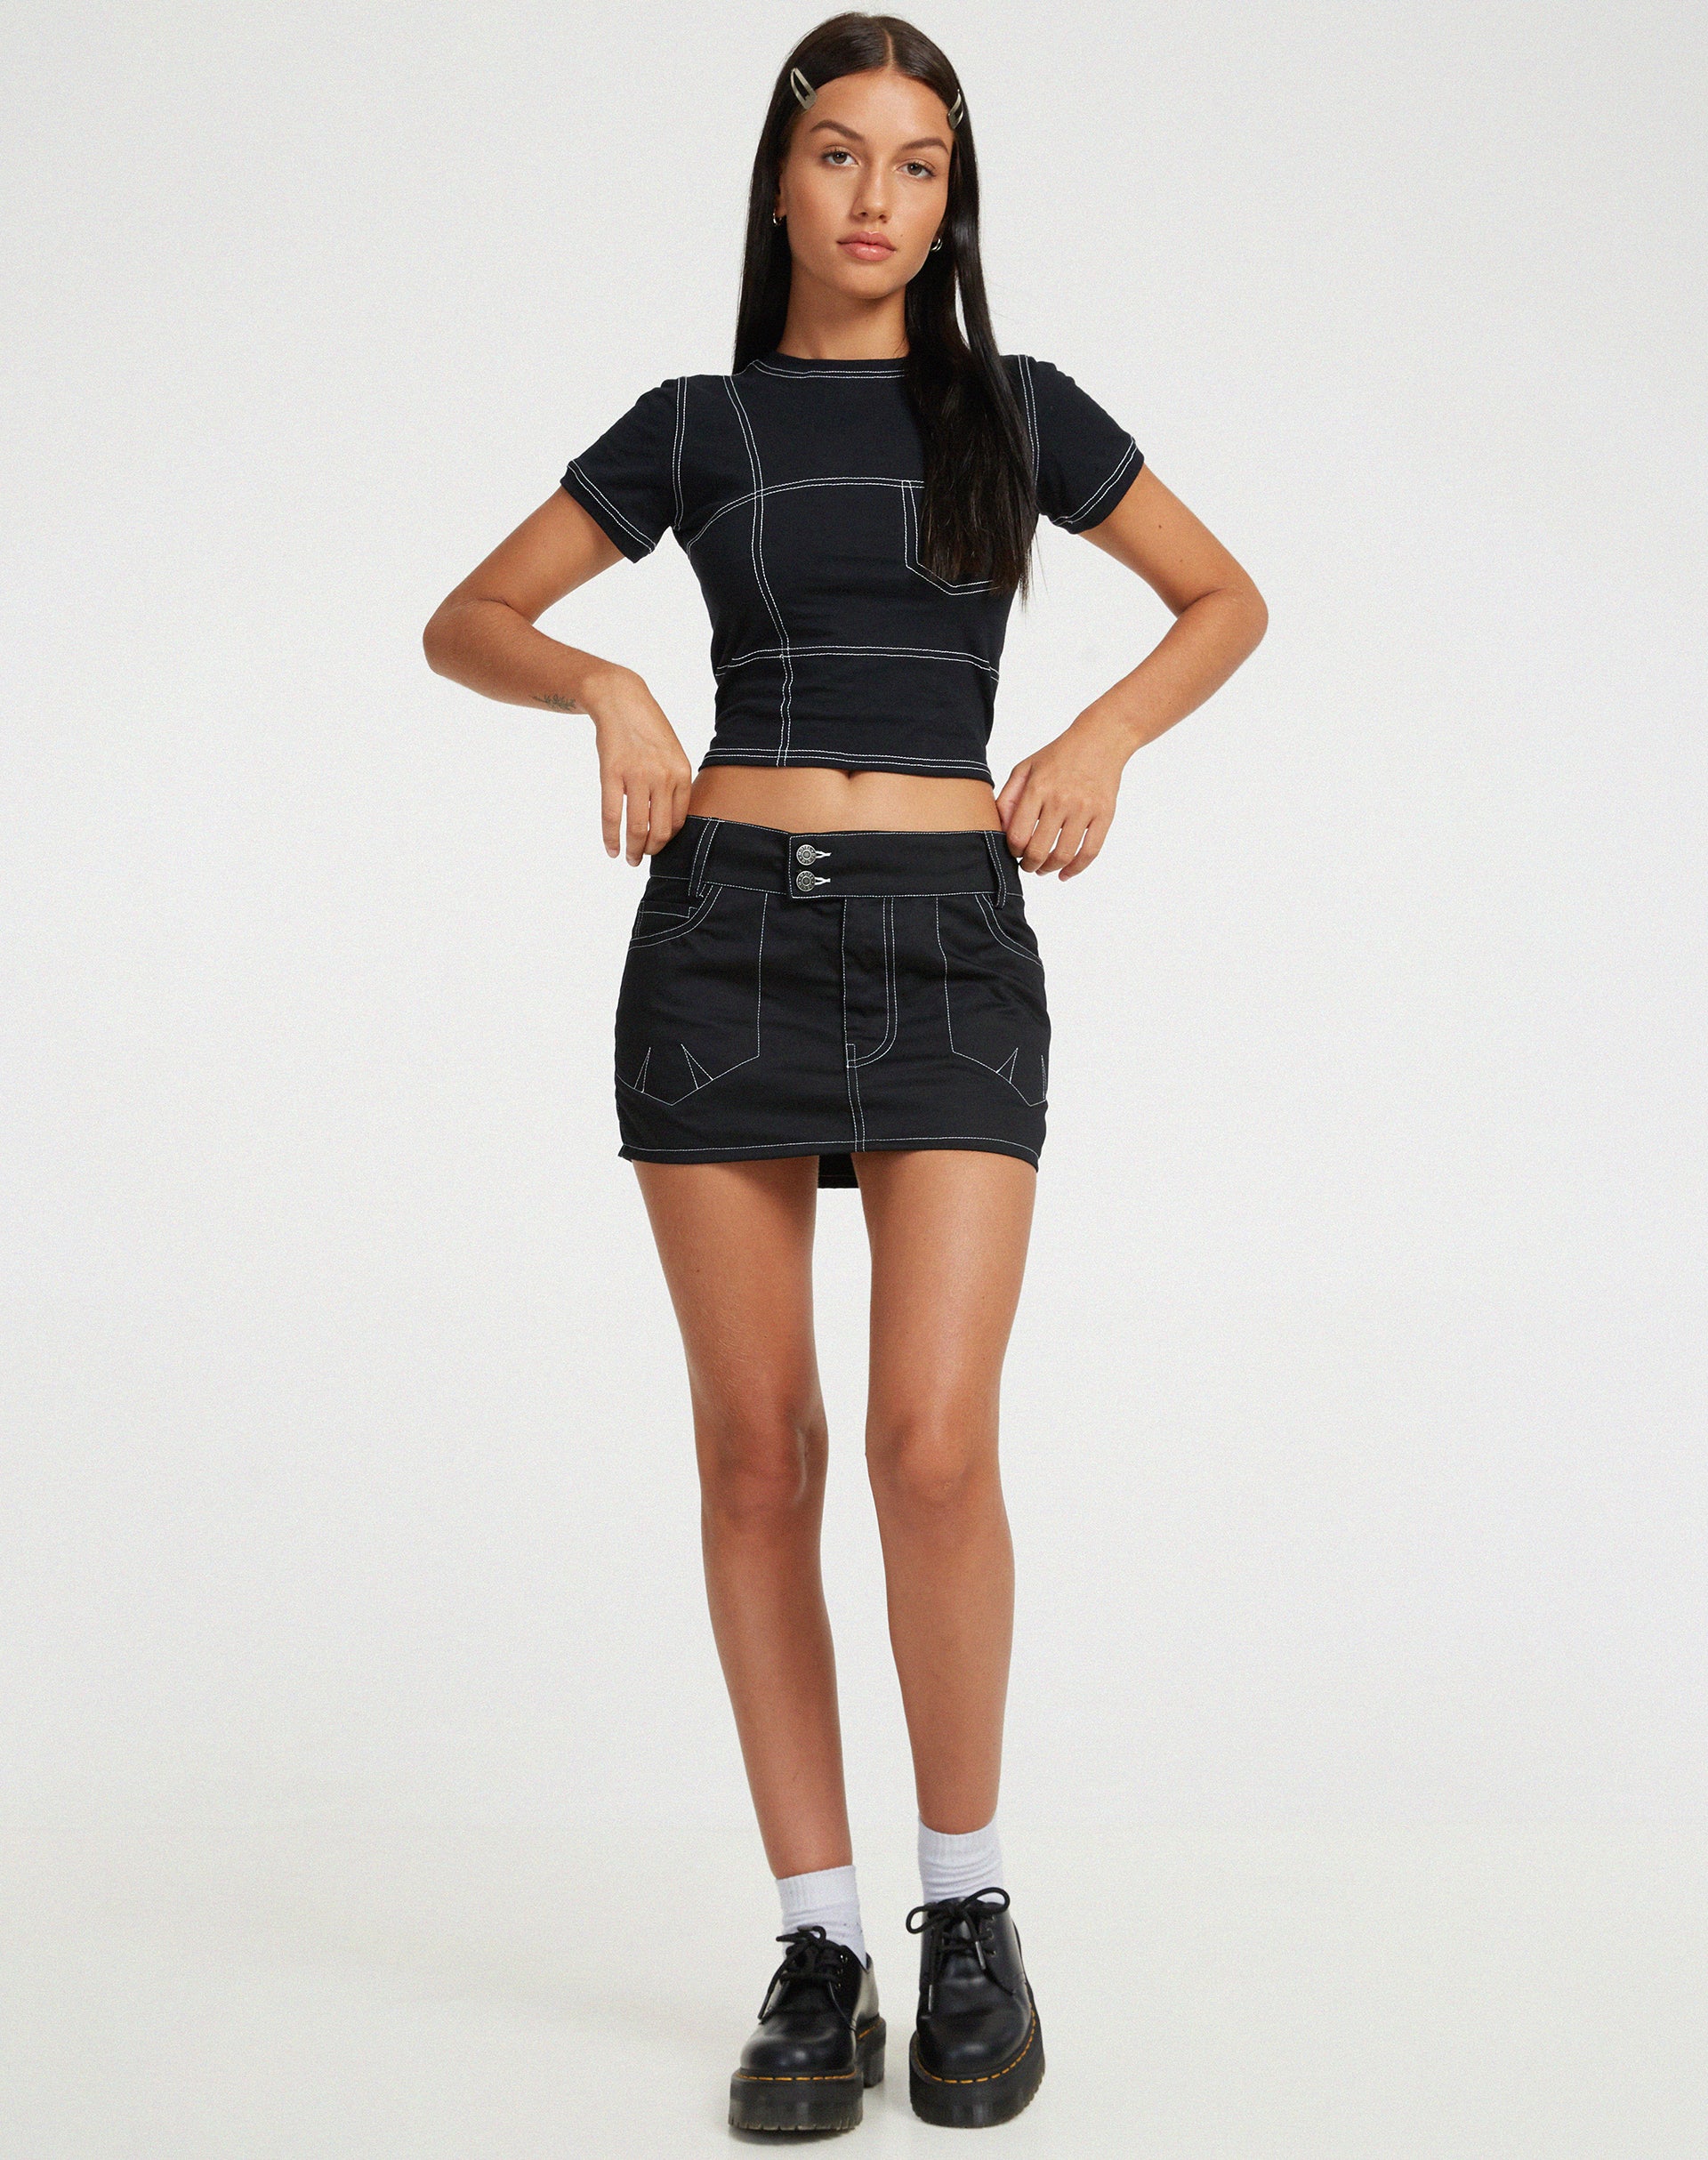 image of Shyla Cropped Tee in Black with White Stitch